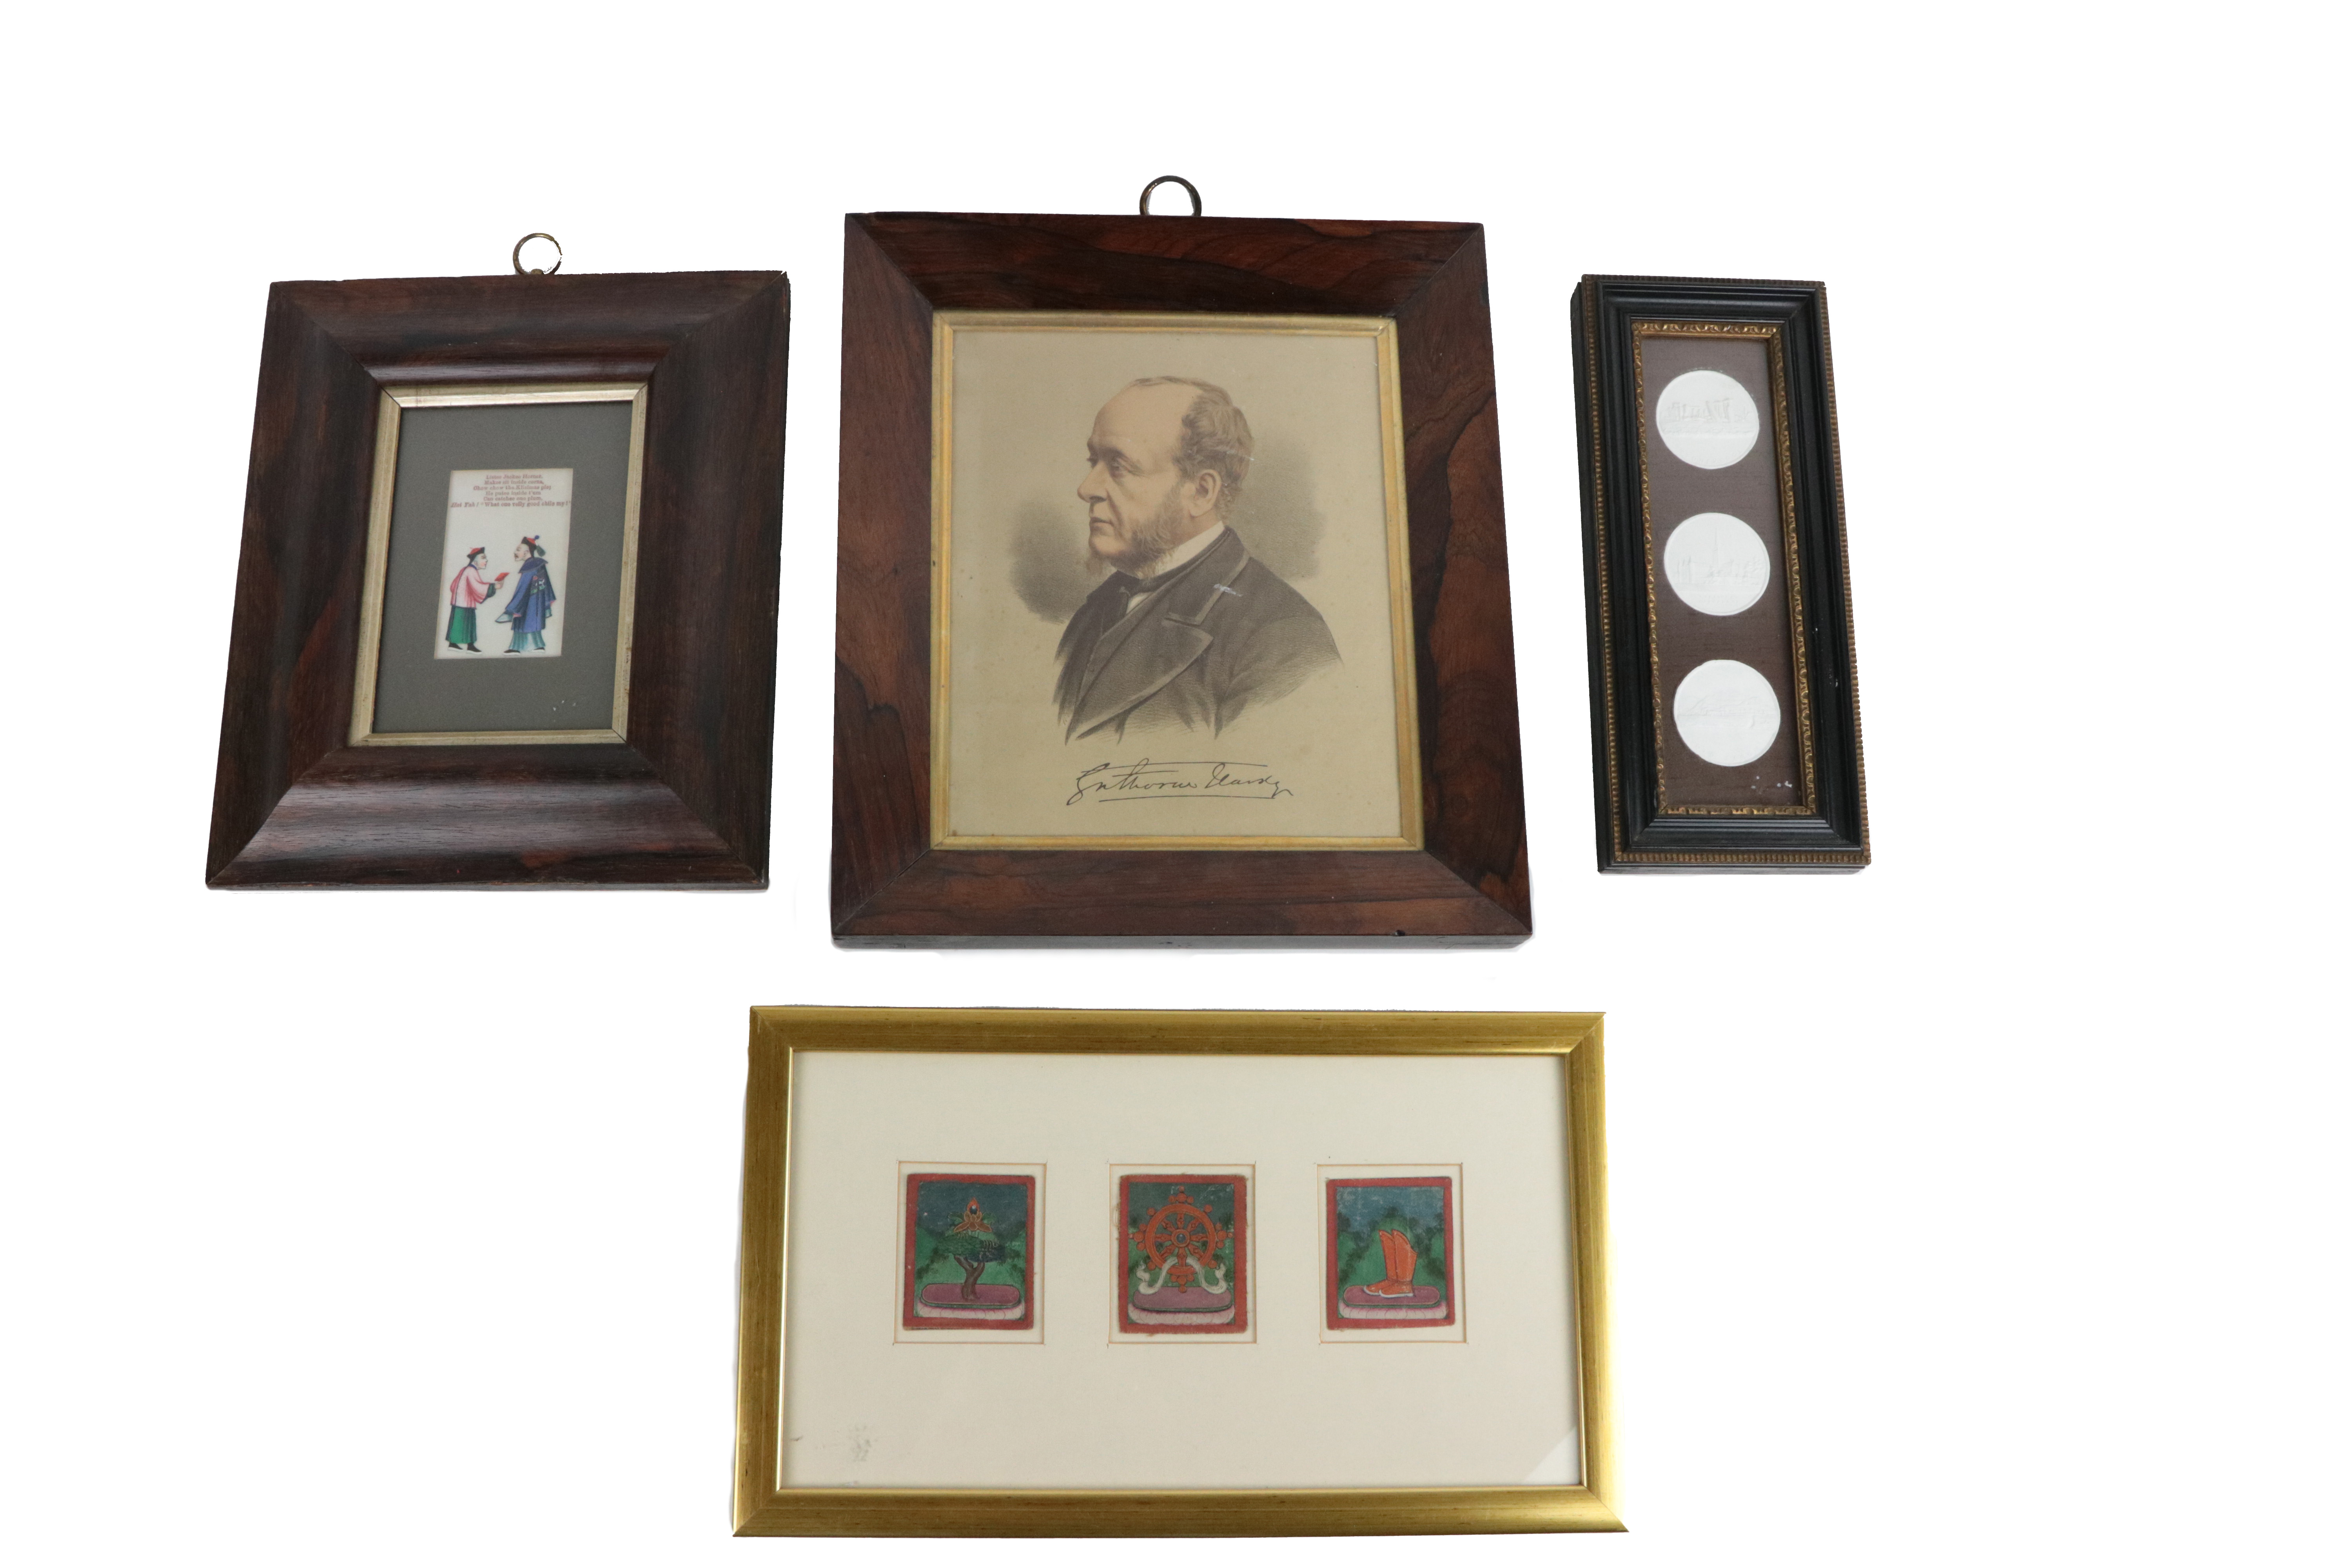 A small Chinese Painting on rice paper, a 19th Century coloured Portrait Print, both in rosewood - Image 5 of 5